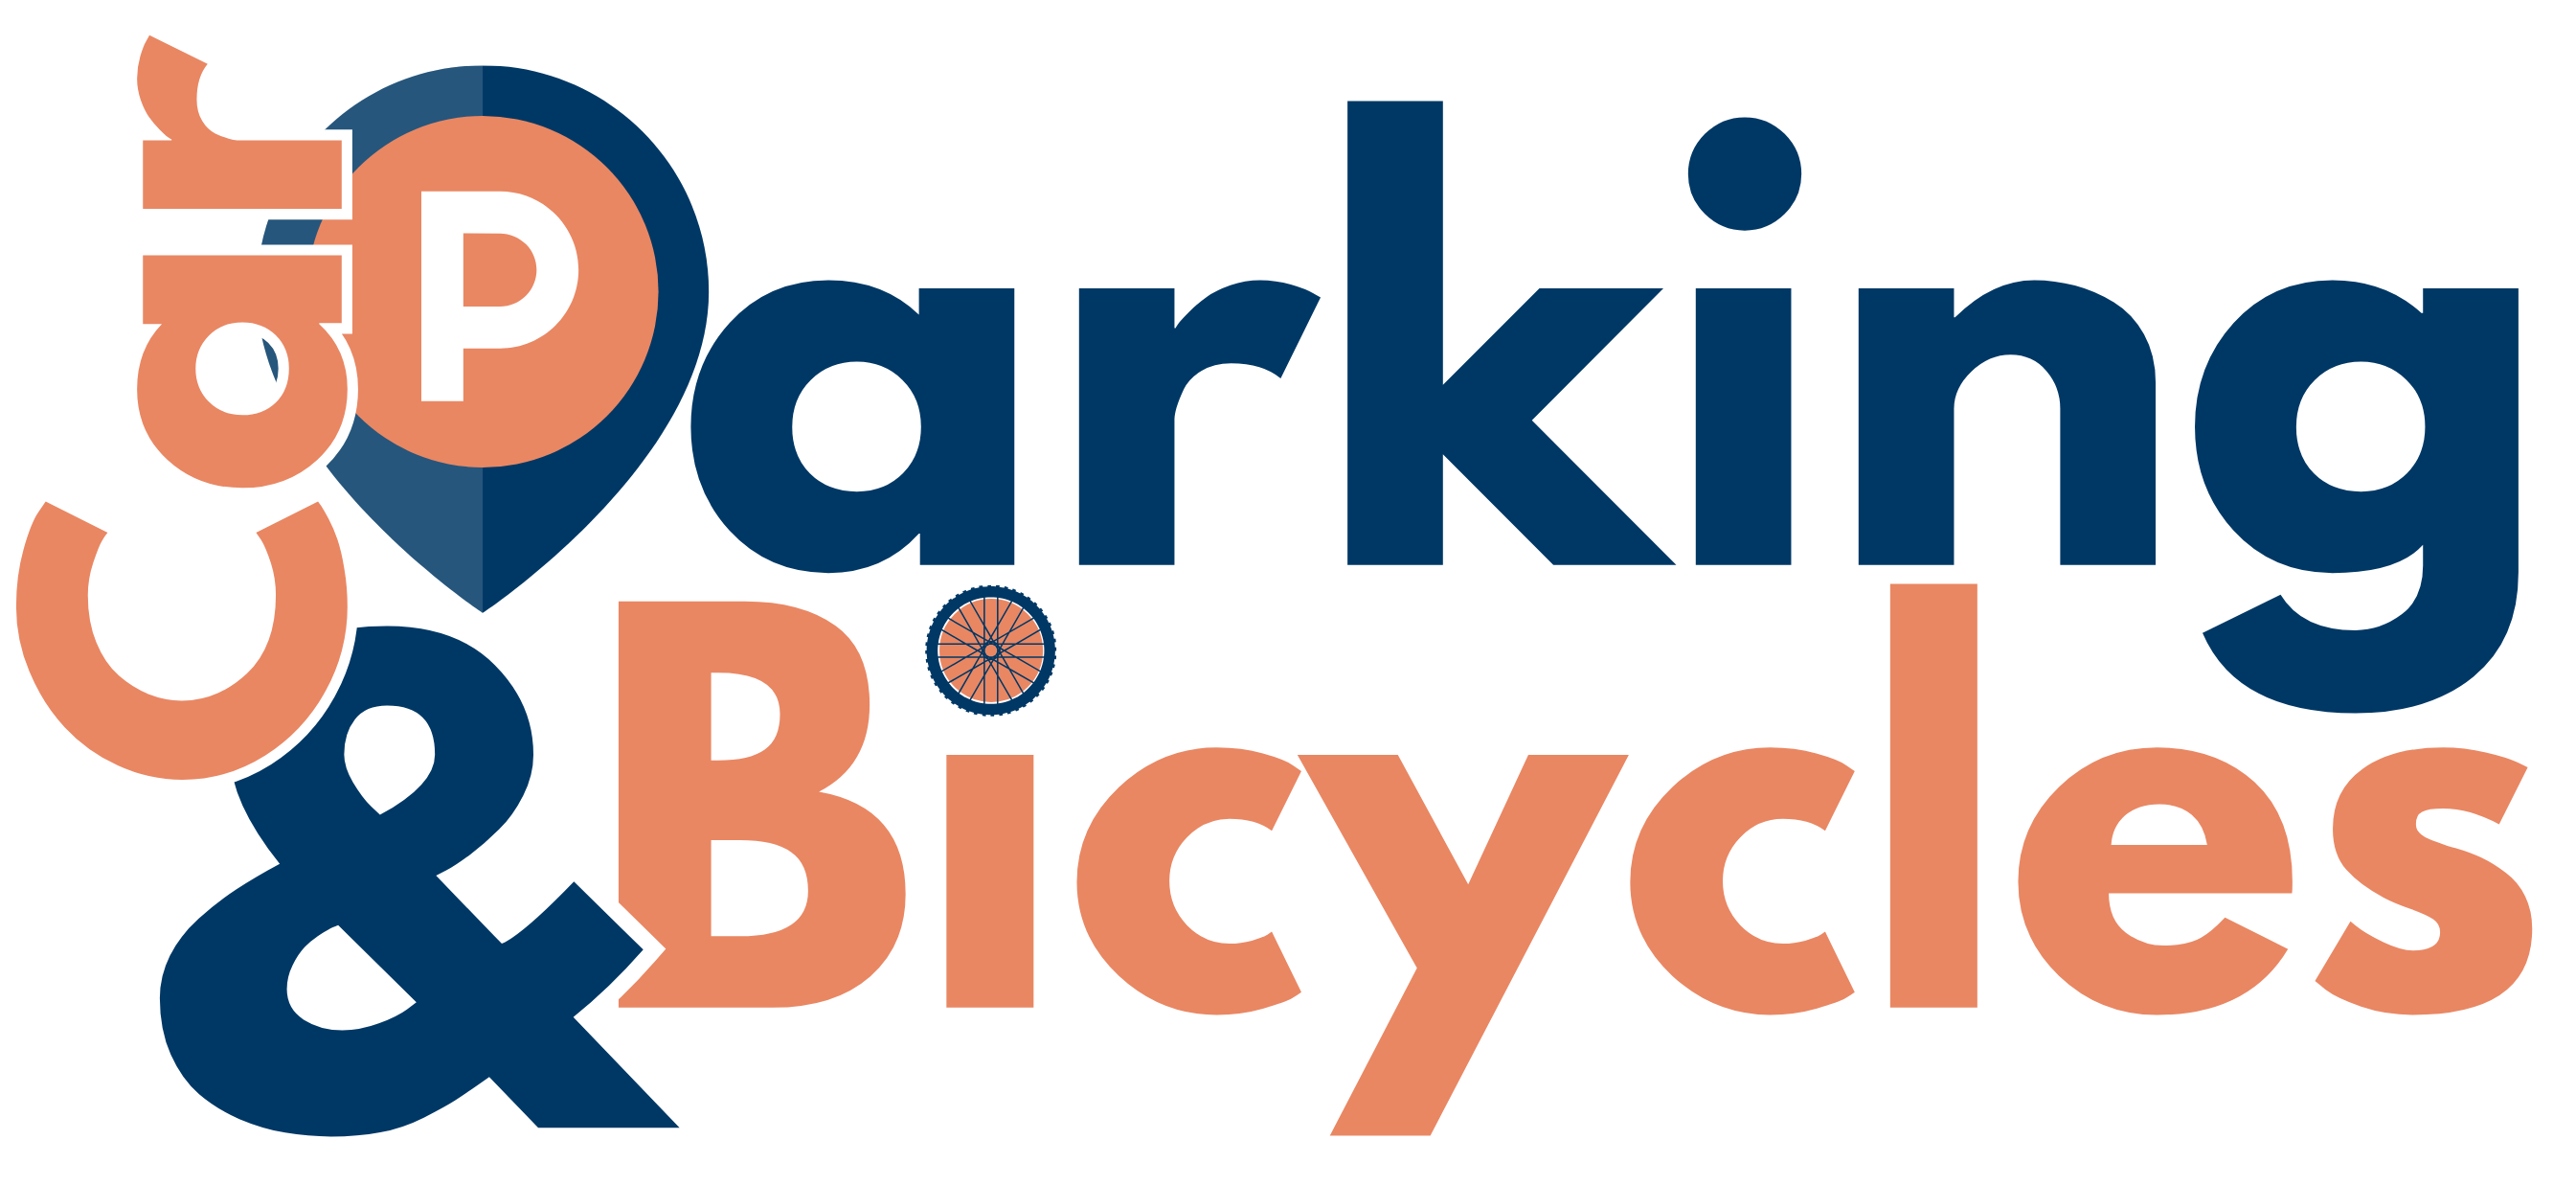 Car Parking & Bicycles Title